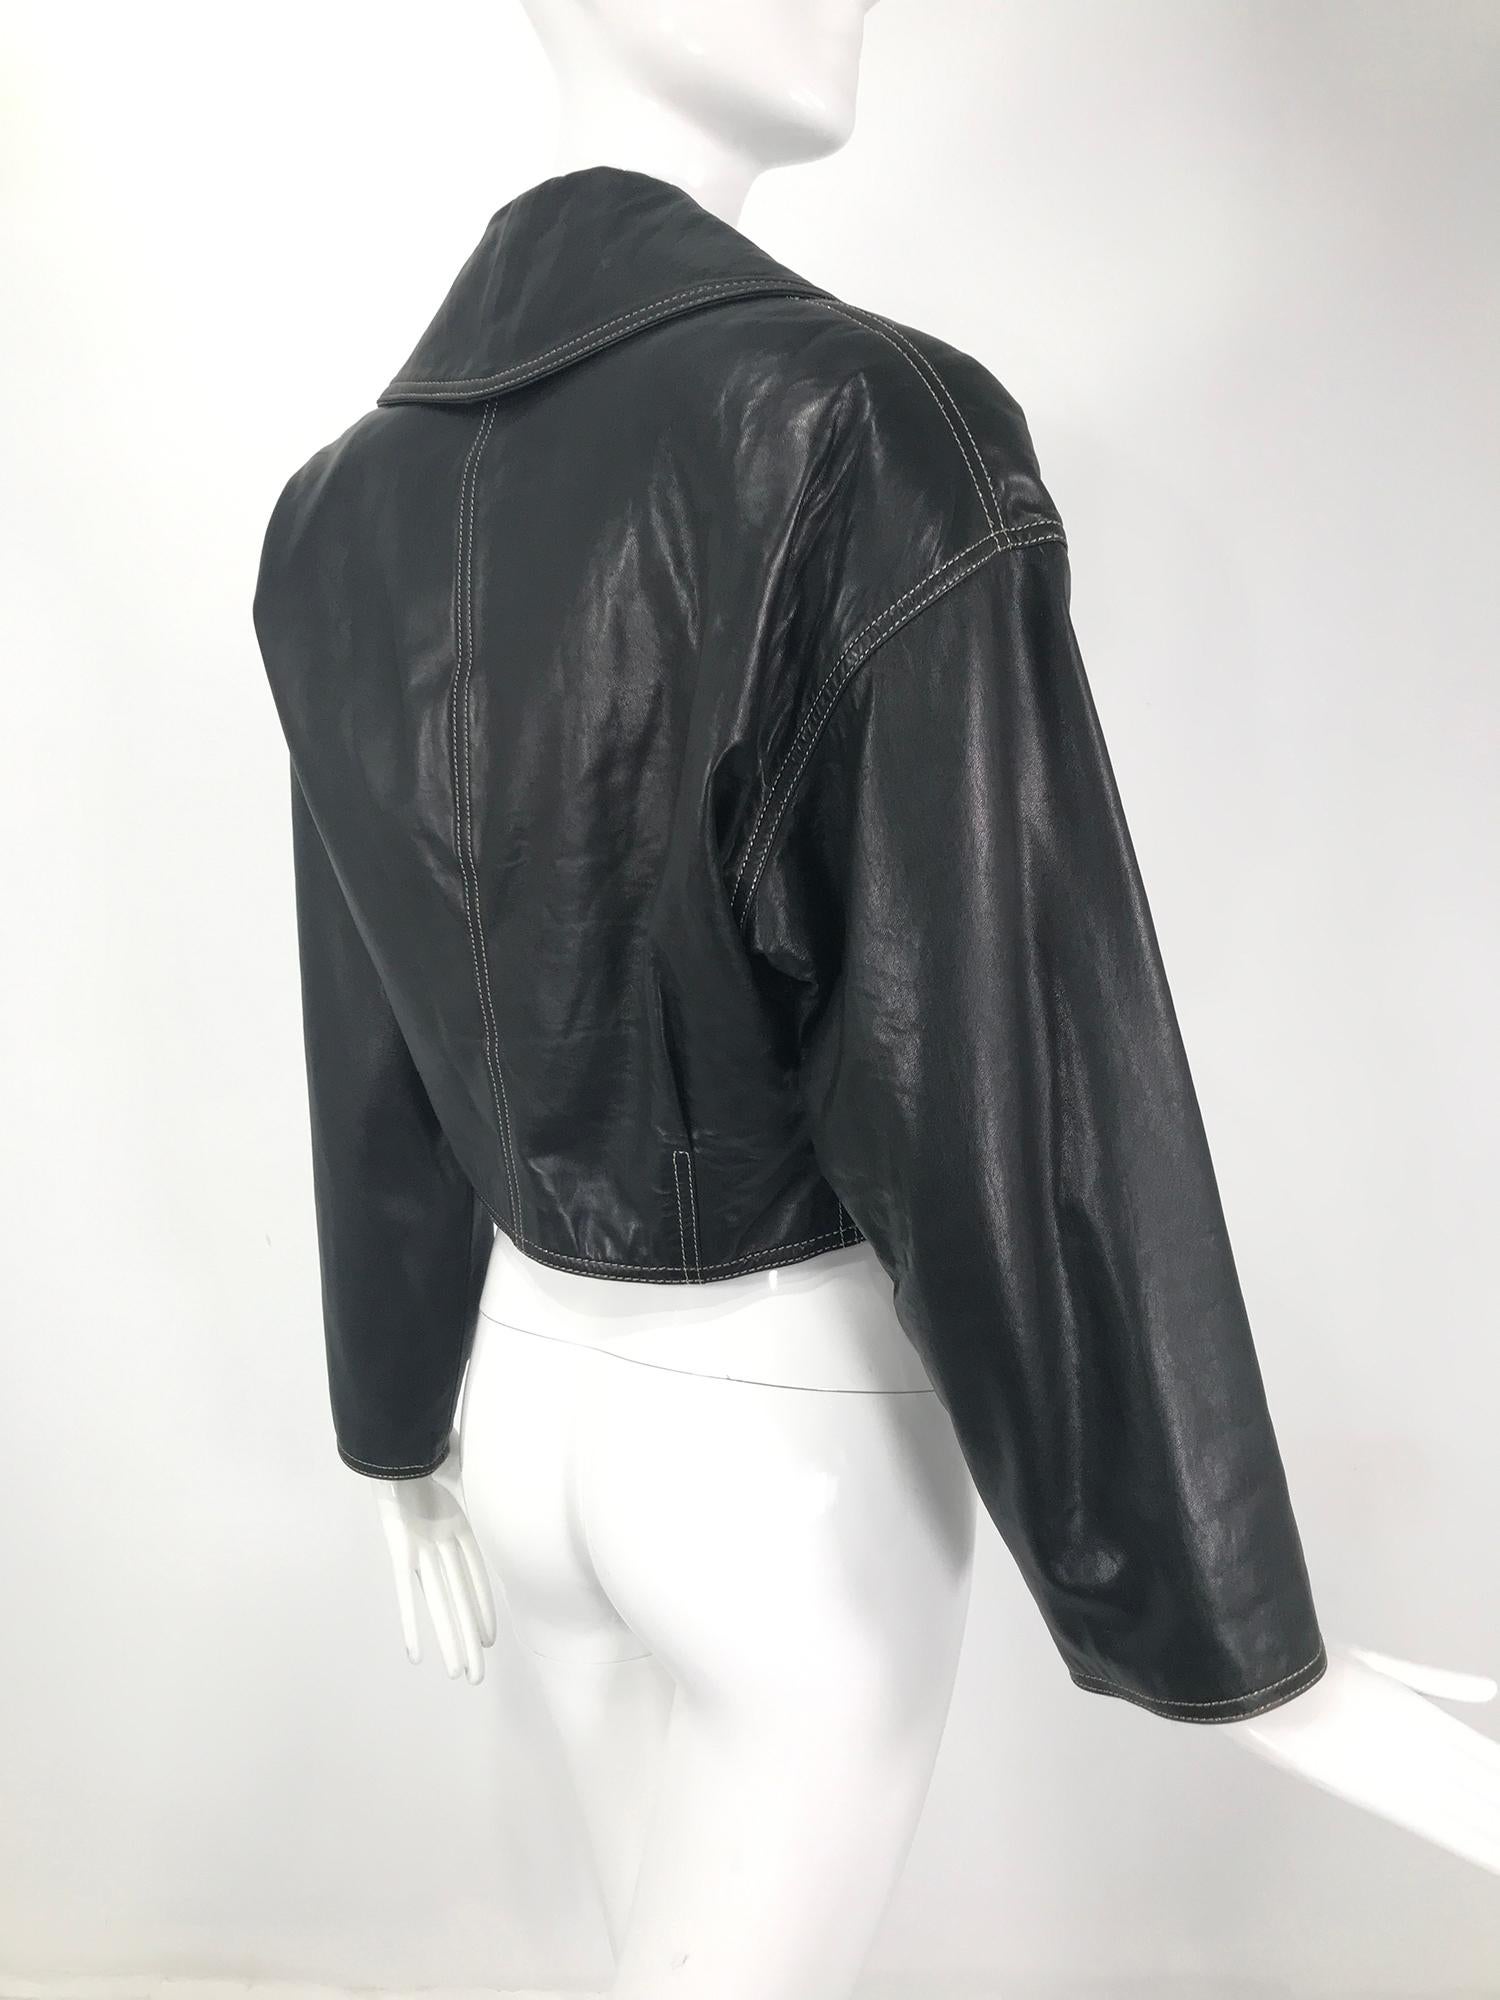 Genny Black Leather Bomber Jacket With Rhinestone Buttons & Gold Stitching 1980s For Sale 3